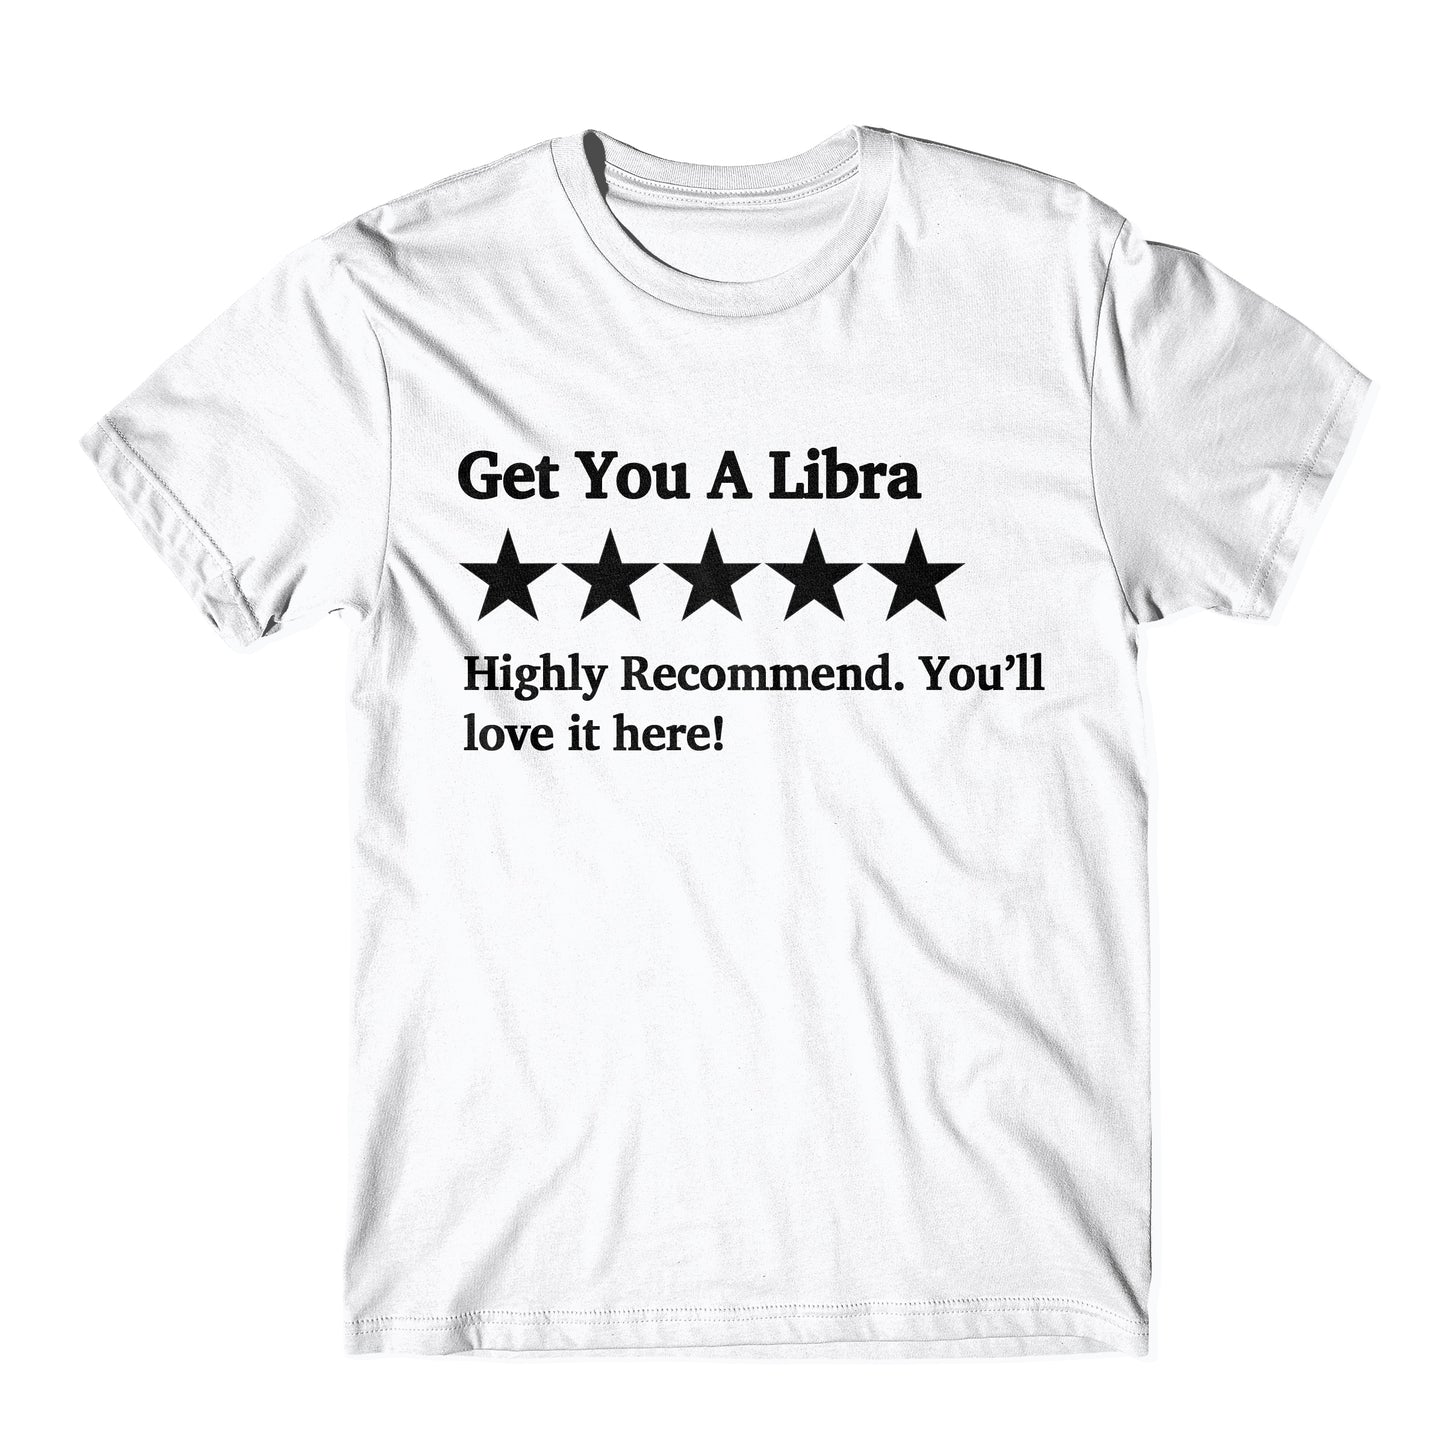 "Get You A Libra Five Star Rating" Tee